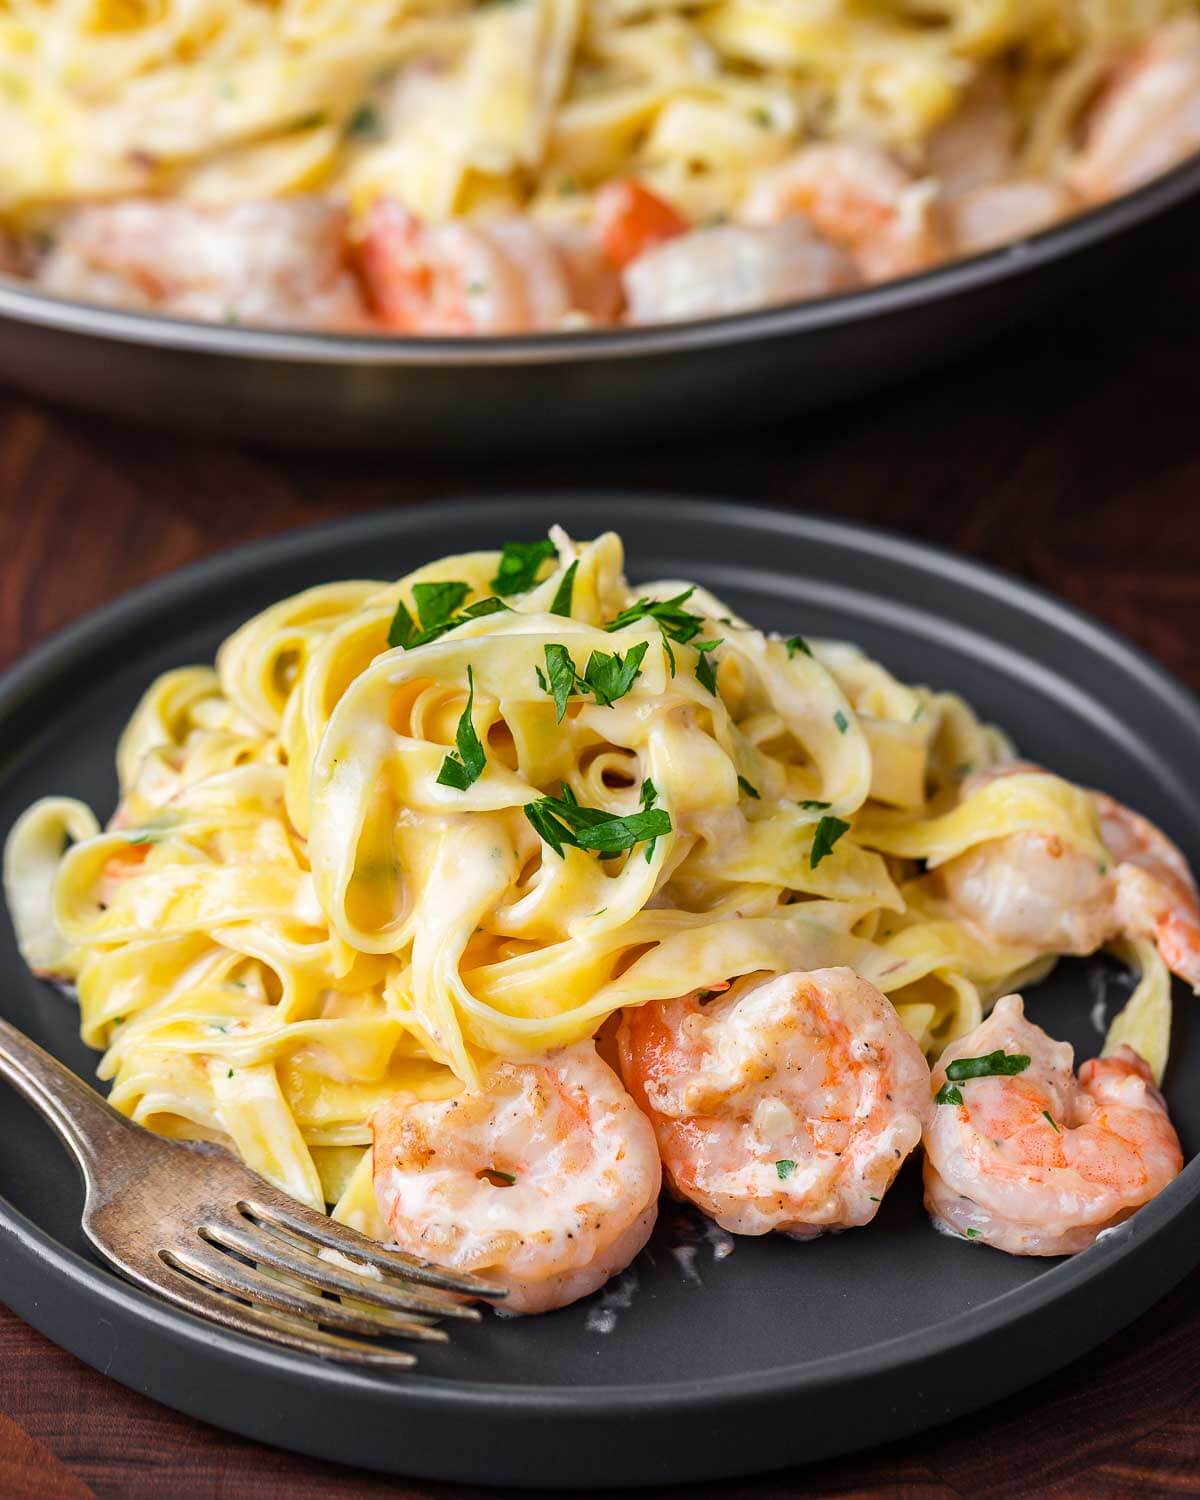 Shrimp alfredo in grey plate with large pan in background.